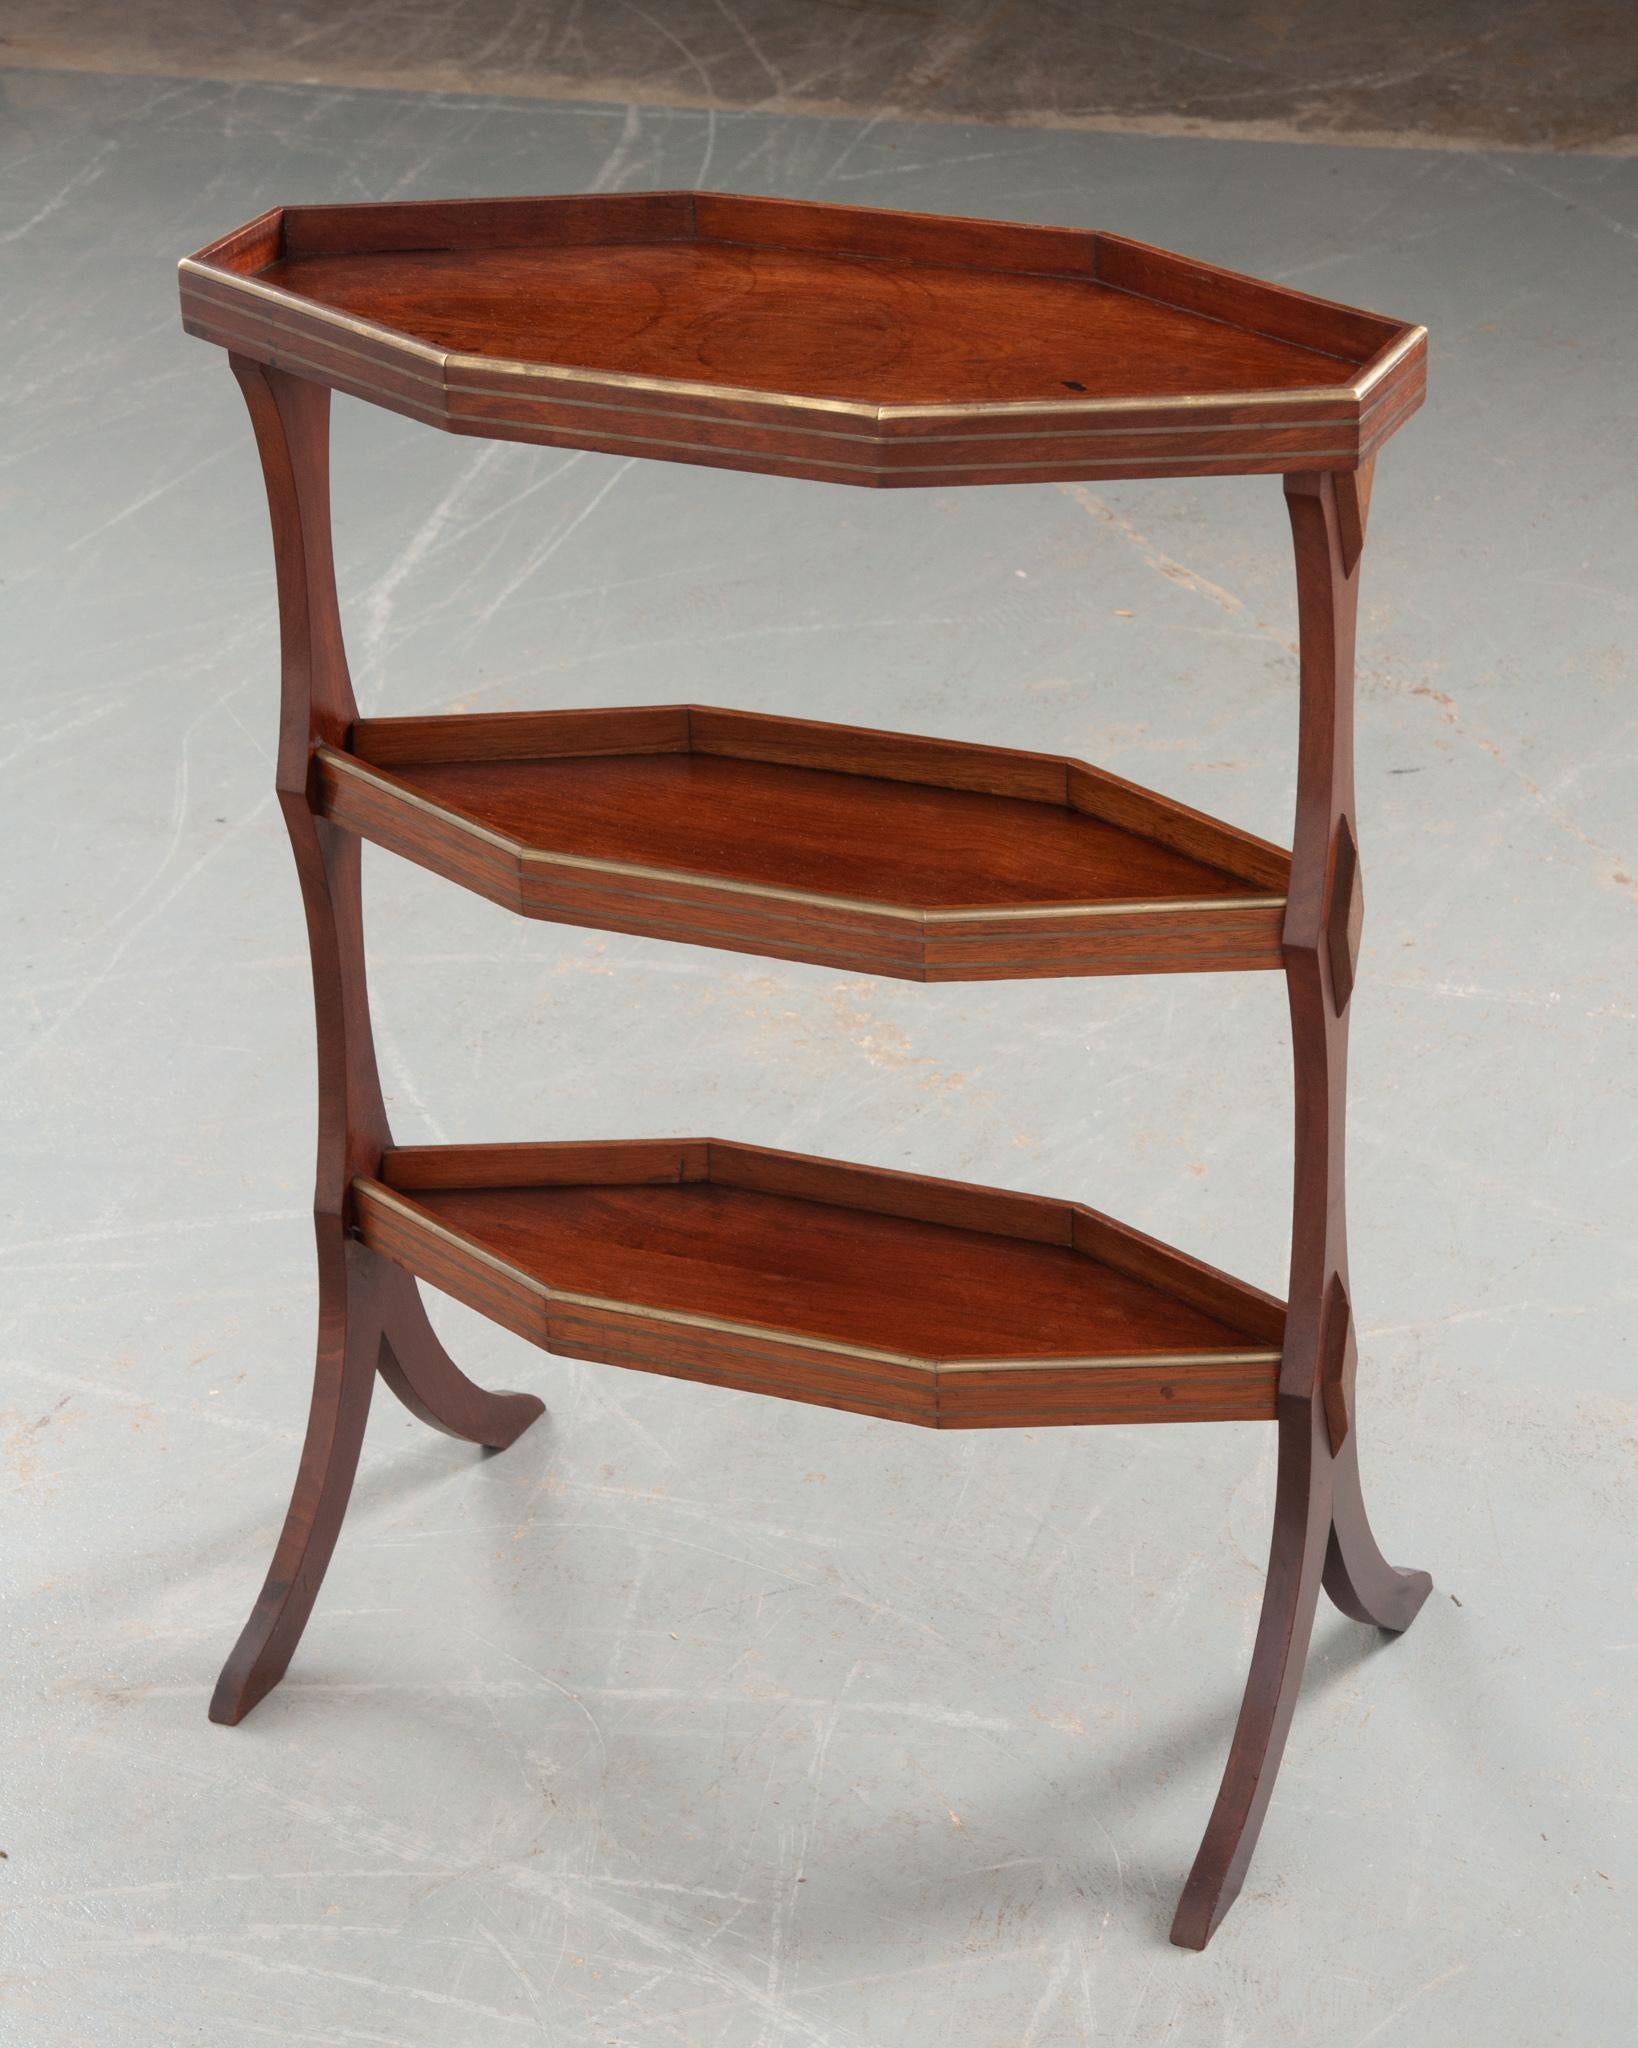 A petite vintage mahogany three tier table from 20th century France. The table features three shelves all inlay with brass bands; the elongated octagonal top with a larger raised rim and the lower two hexagonal shelves. Attractive raised diamond